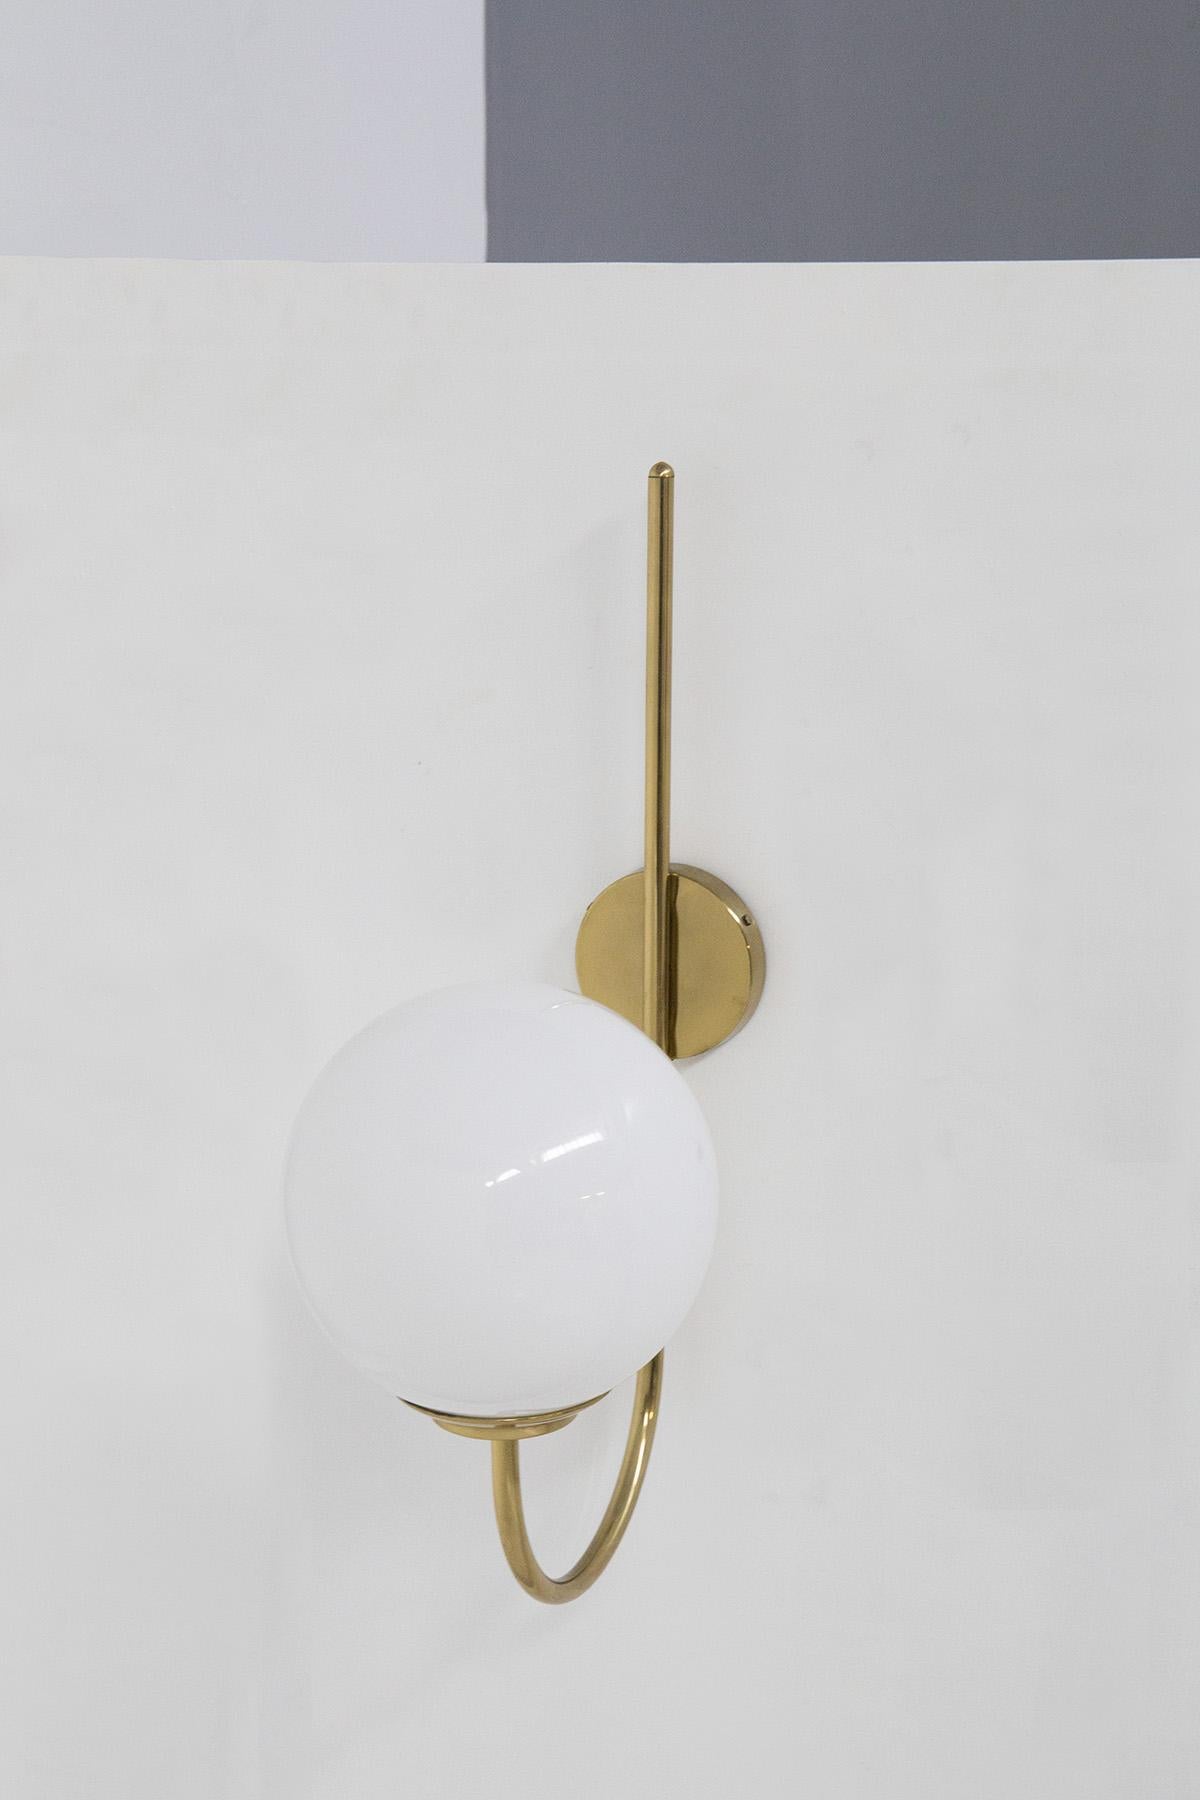 Splendid wall lamp designed by Luigi Caccia Dominioni in the 1950s for the Italian manufacturer Azucena.
The wall sconce has a beautiful and shiny gilded brass stem, which is attached to the wall by means of a round plate. From this springs a thin,